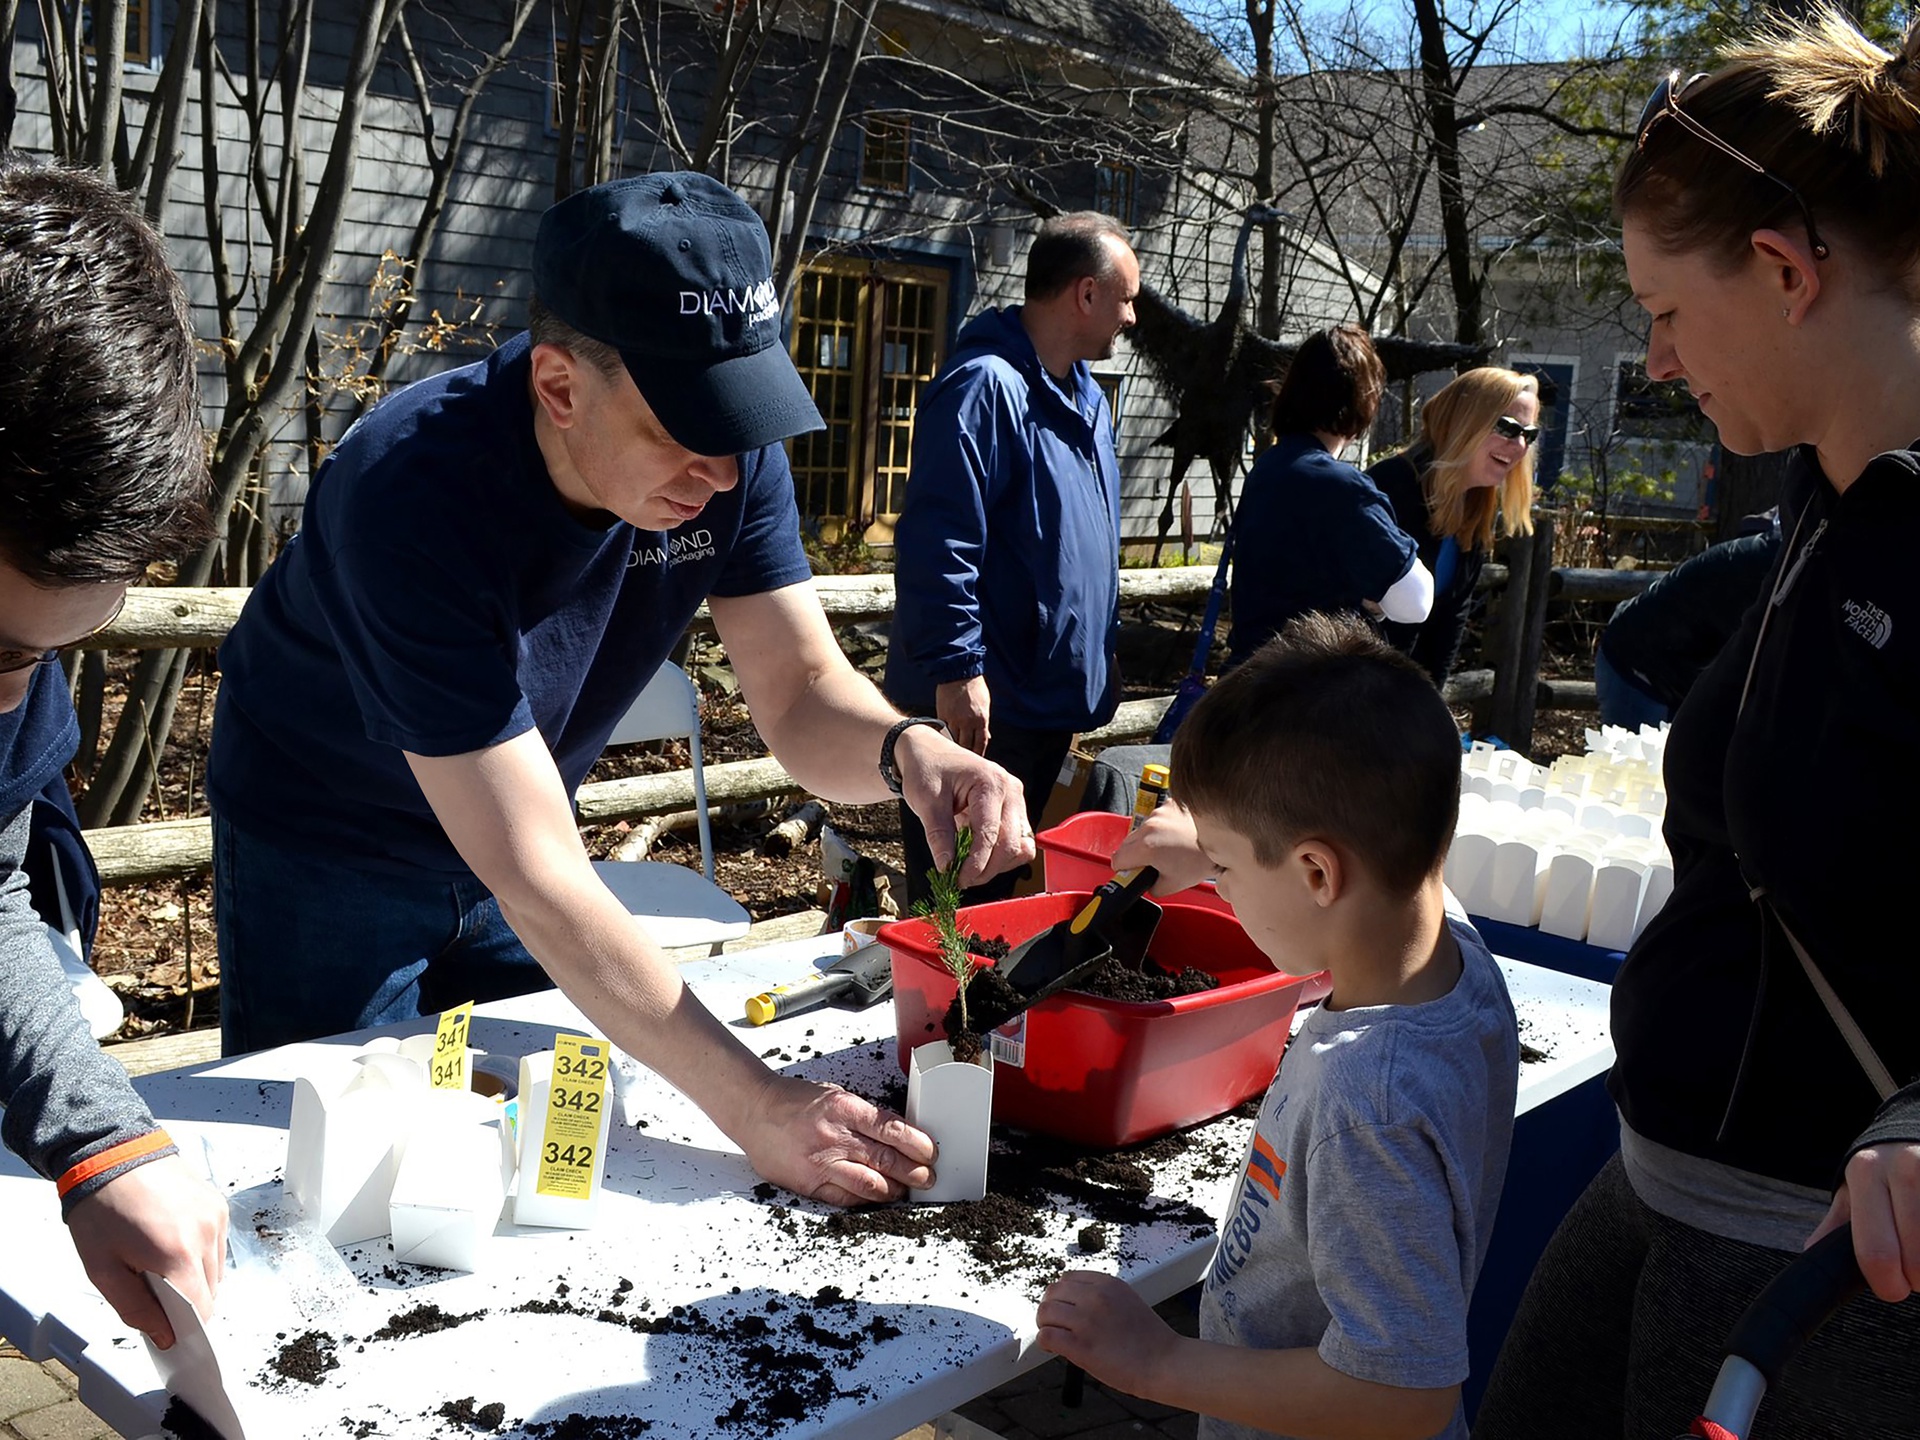 Diamond employees helped kids plant trees as part of the TICCIT (“Trees into Cartons, Cartons into Trees”) program.